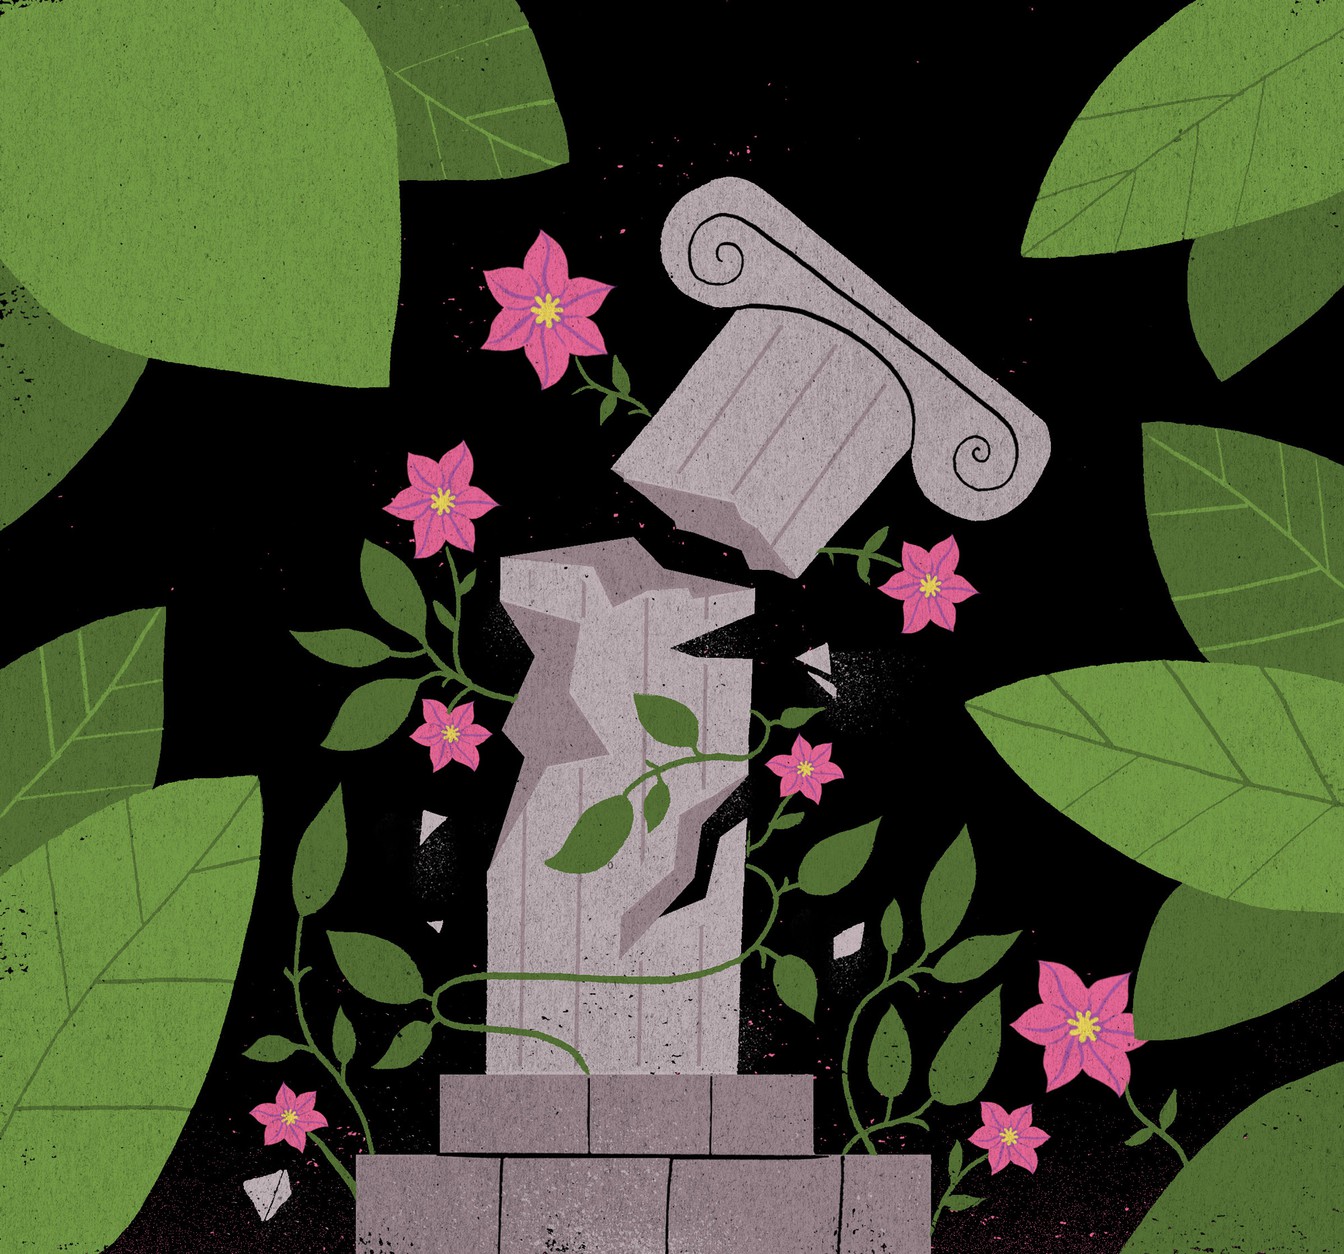 animated image of flowers and column breaking